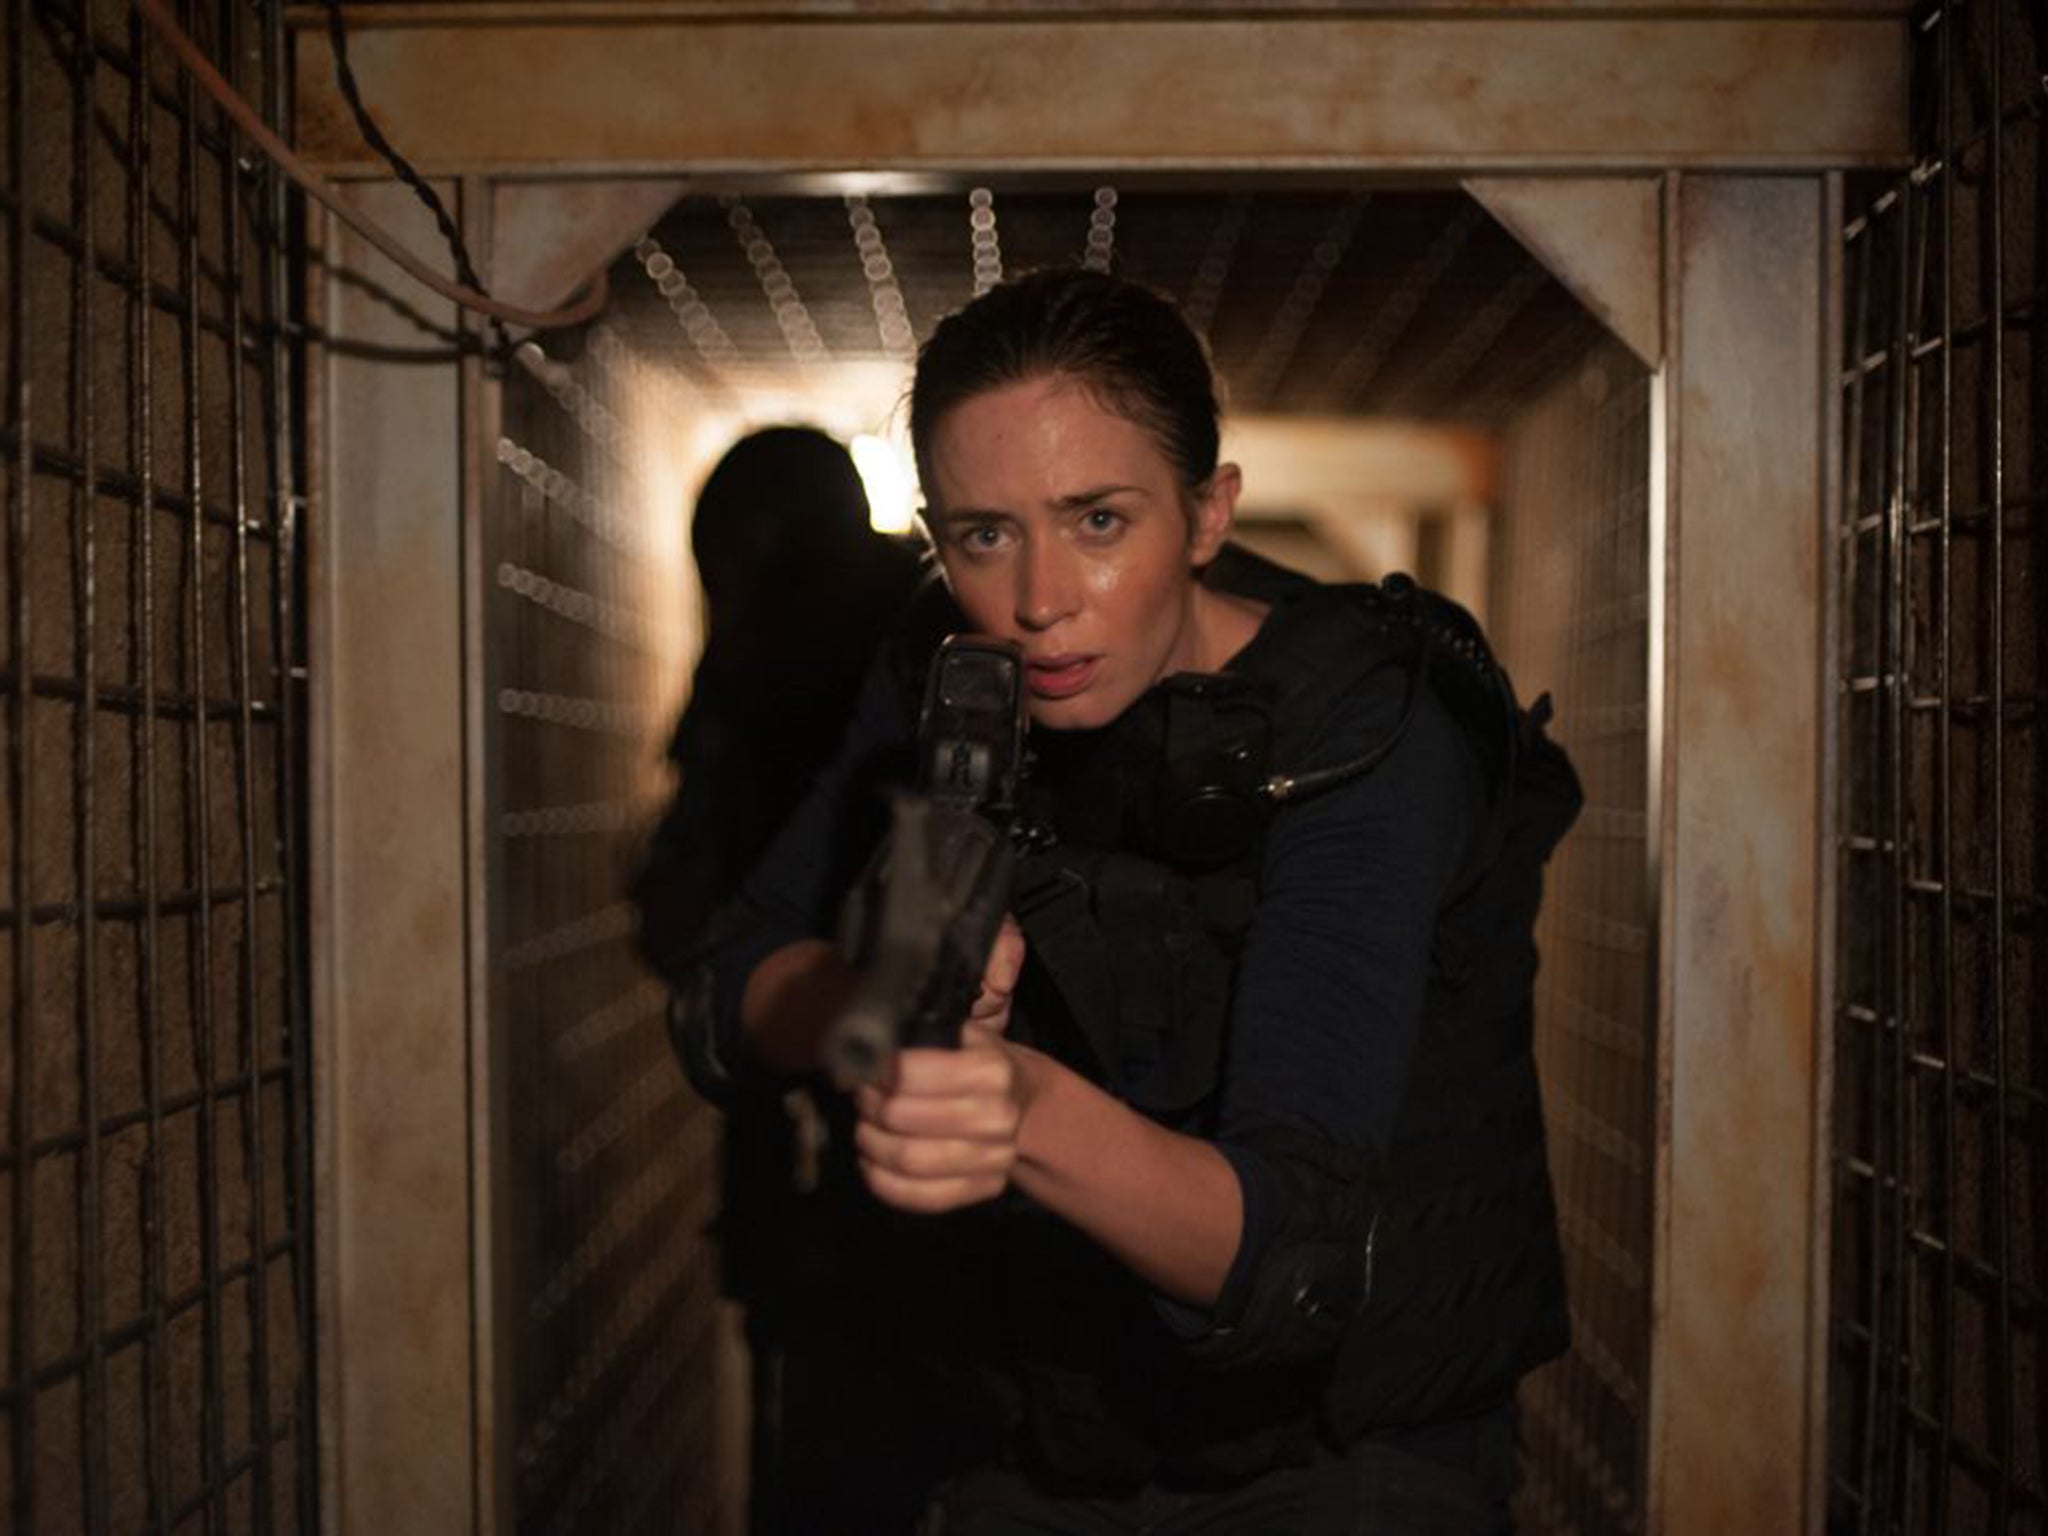 Emily Blunt in 'Sicario'. The mayor of Juarez, where the film’s most violent scenes are set, has called on his city’s residents to boycott the film